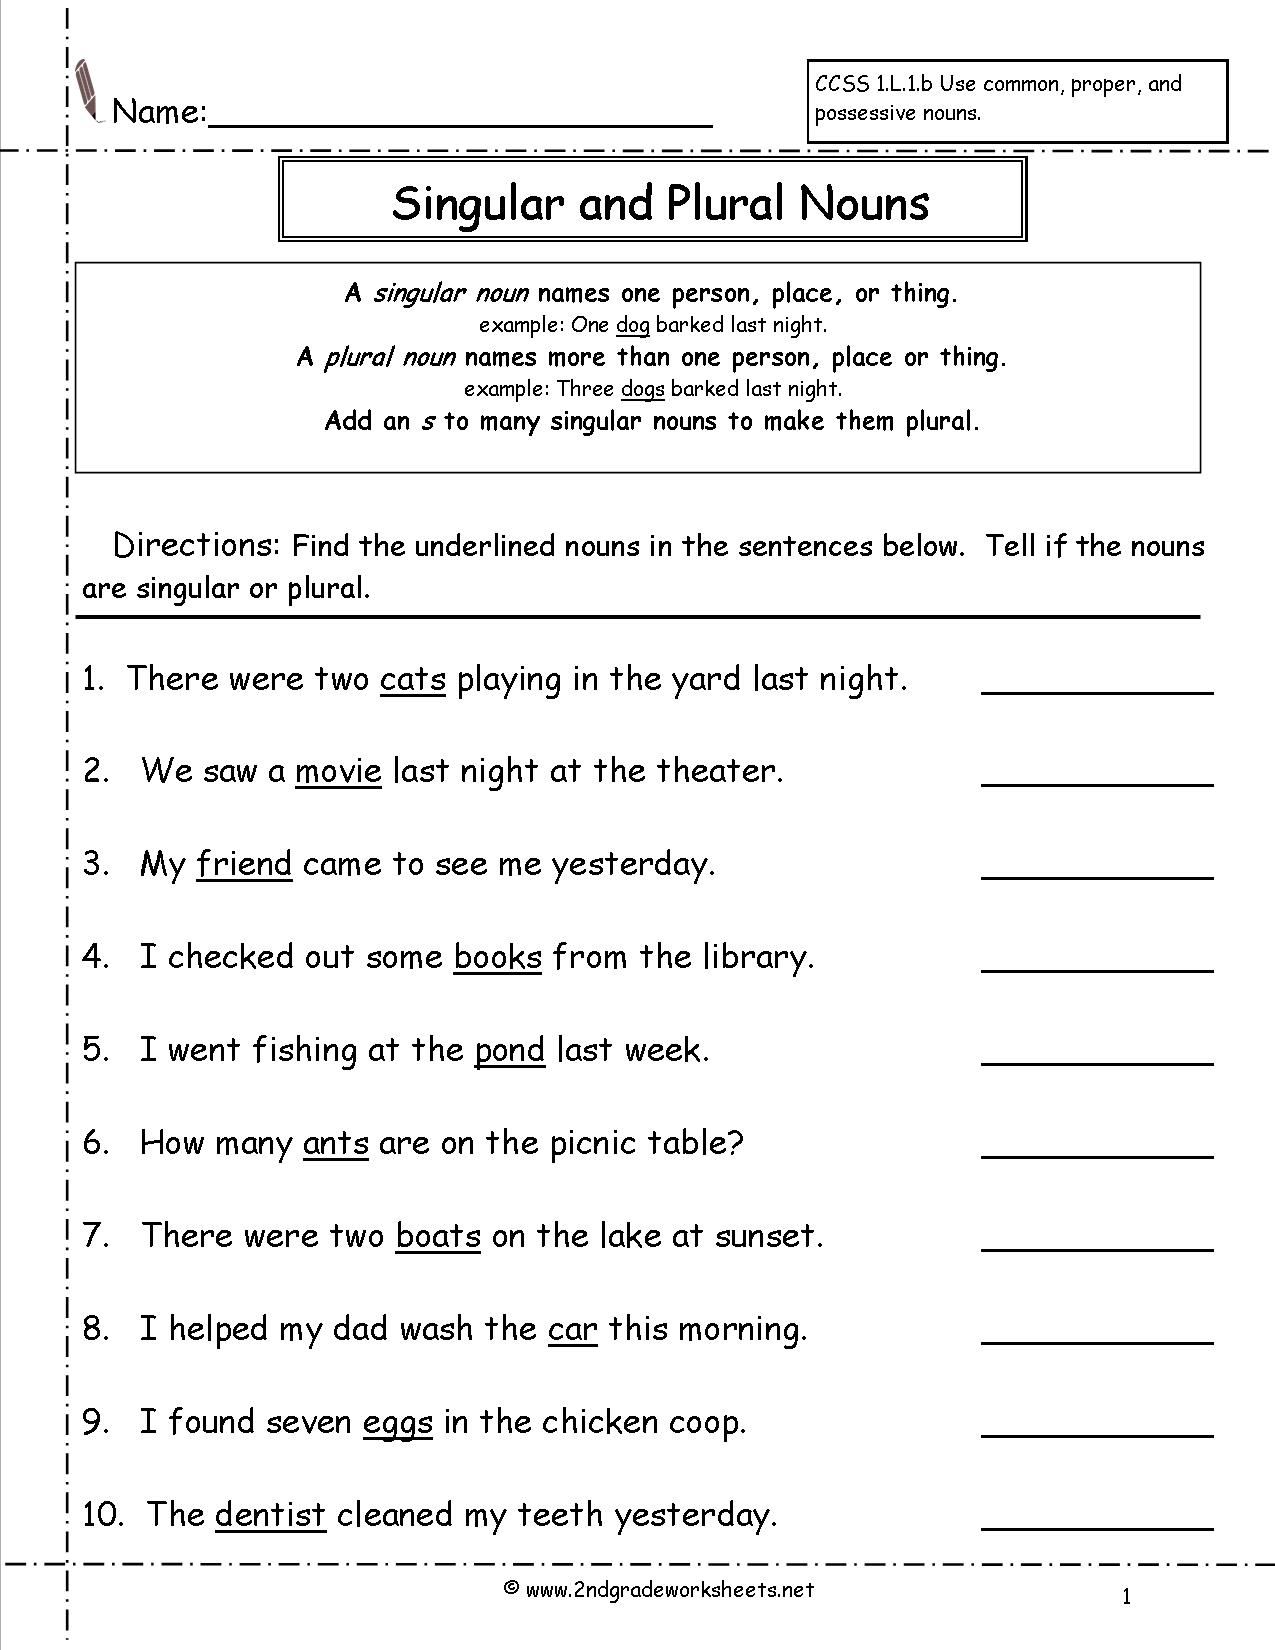 15-best-images-of-common-nouns-worksheet-grade-4-collective-noun